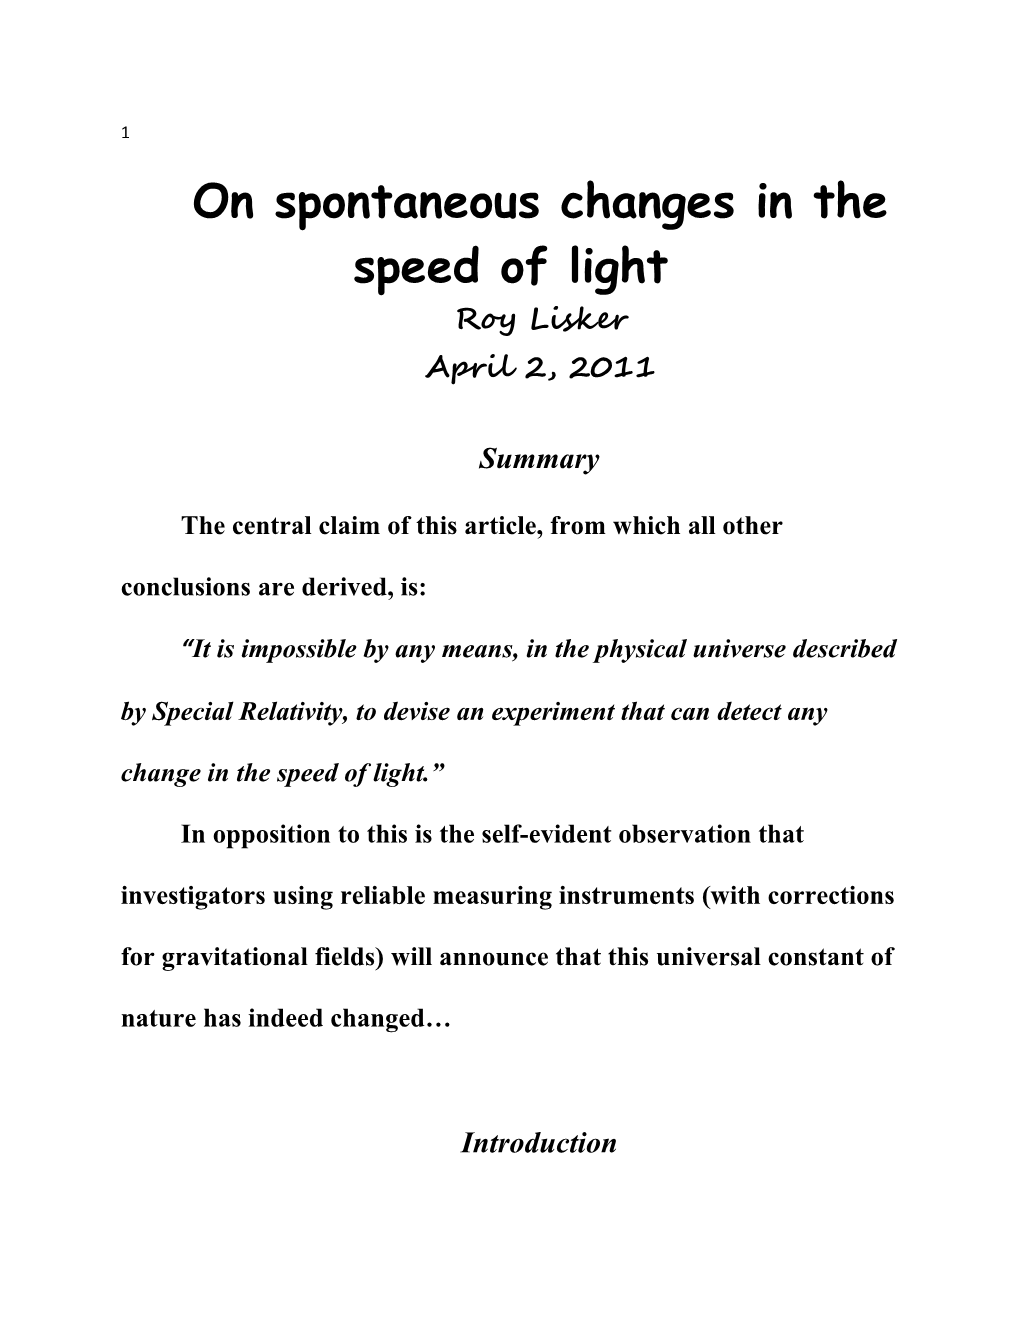 On Spontaneous Changes in the Speed of Light